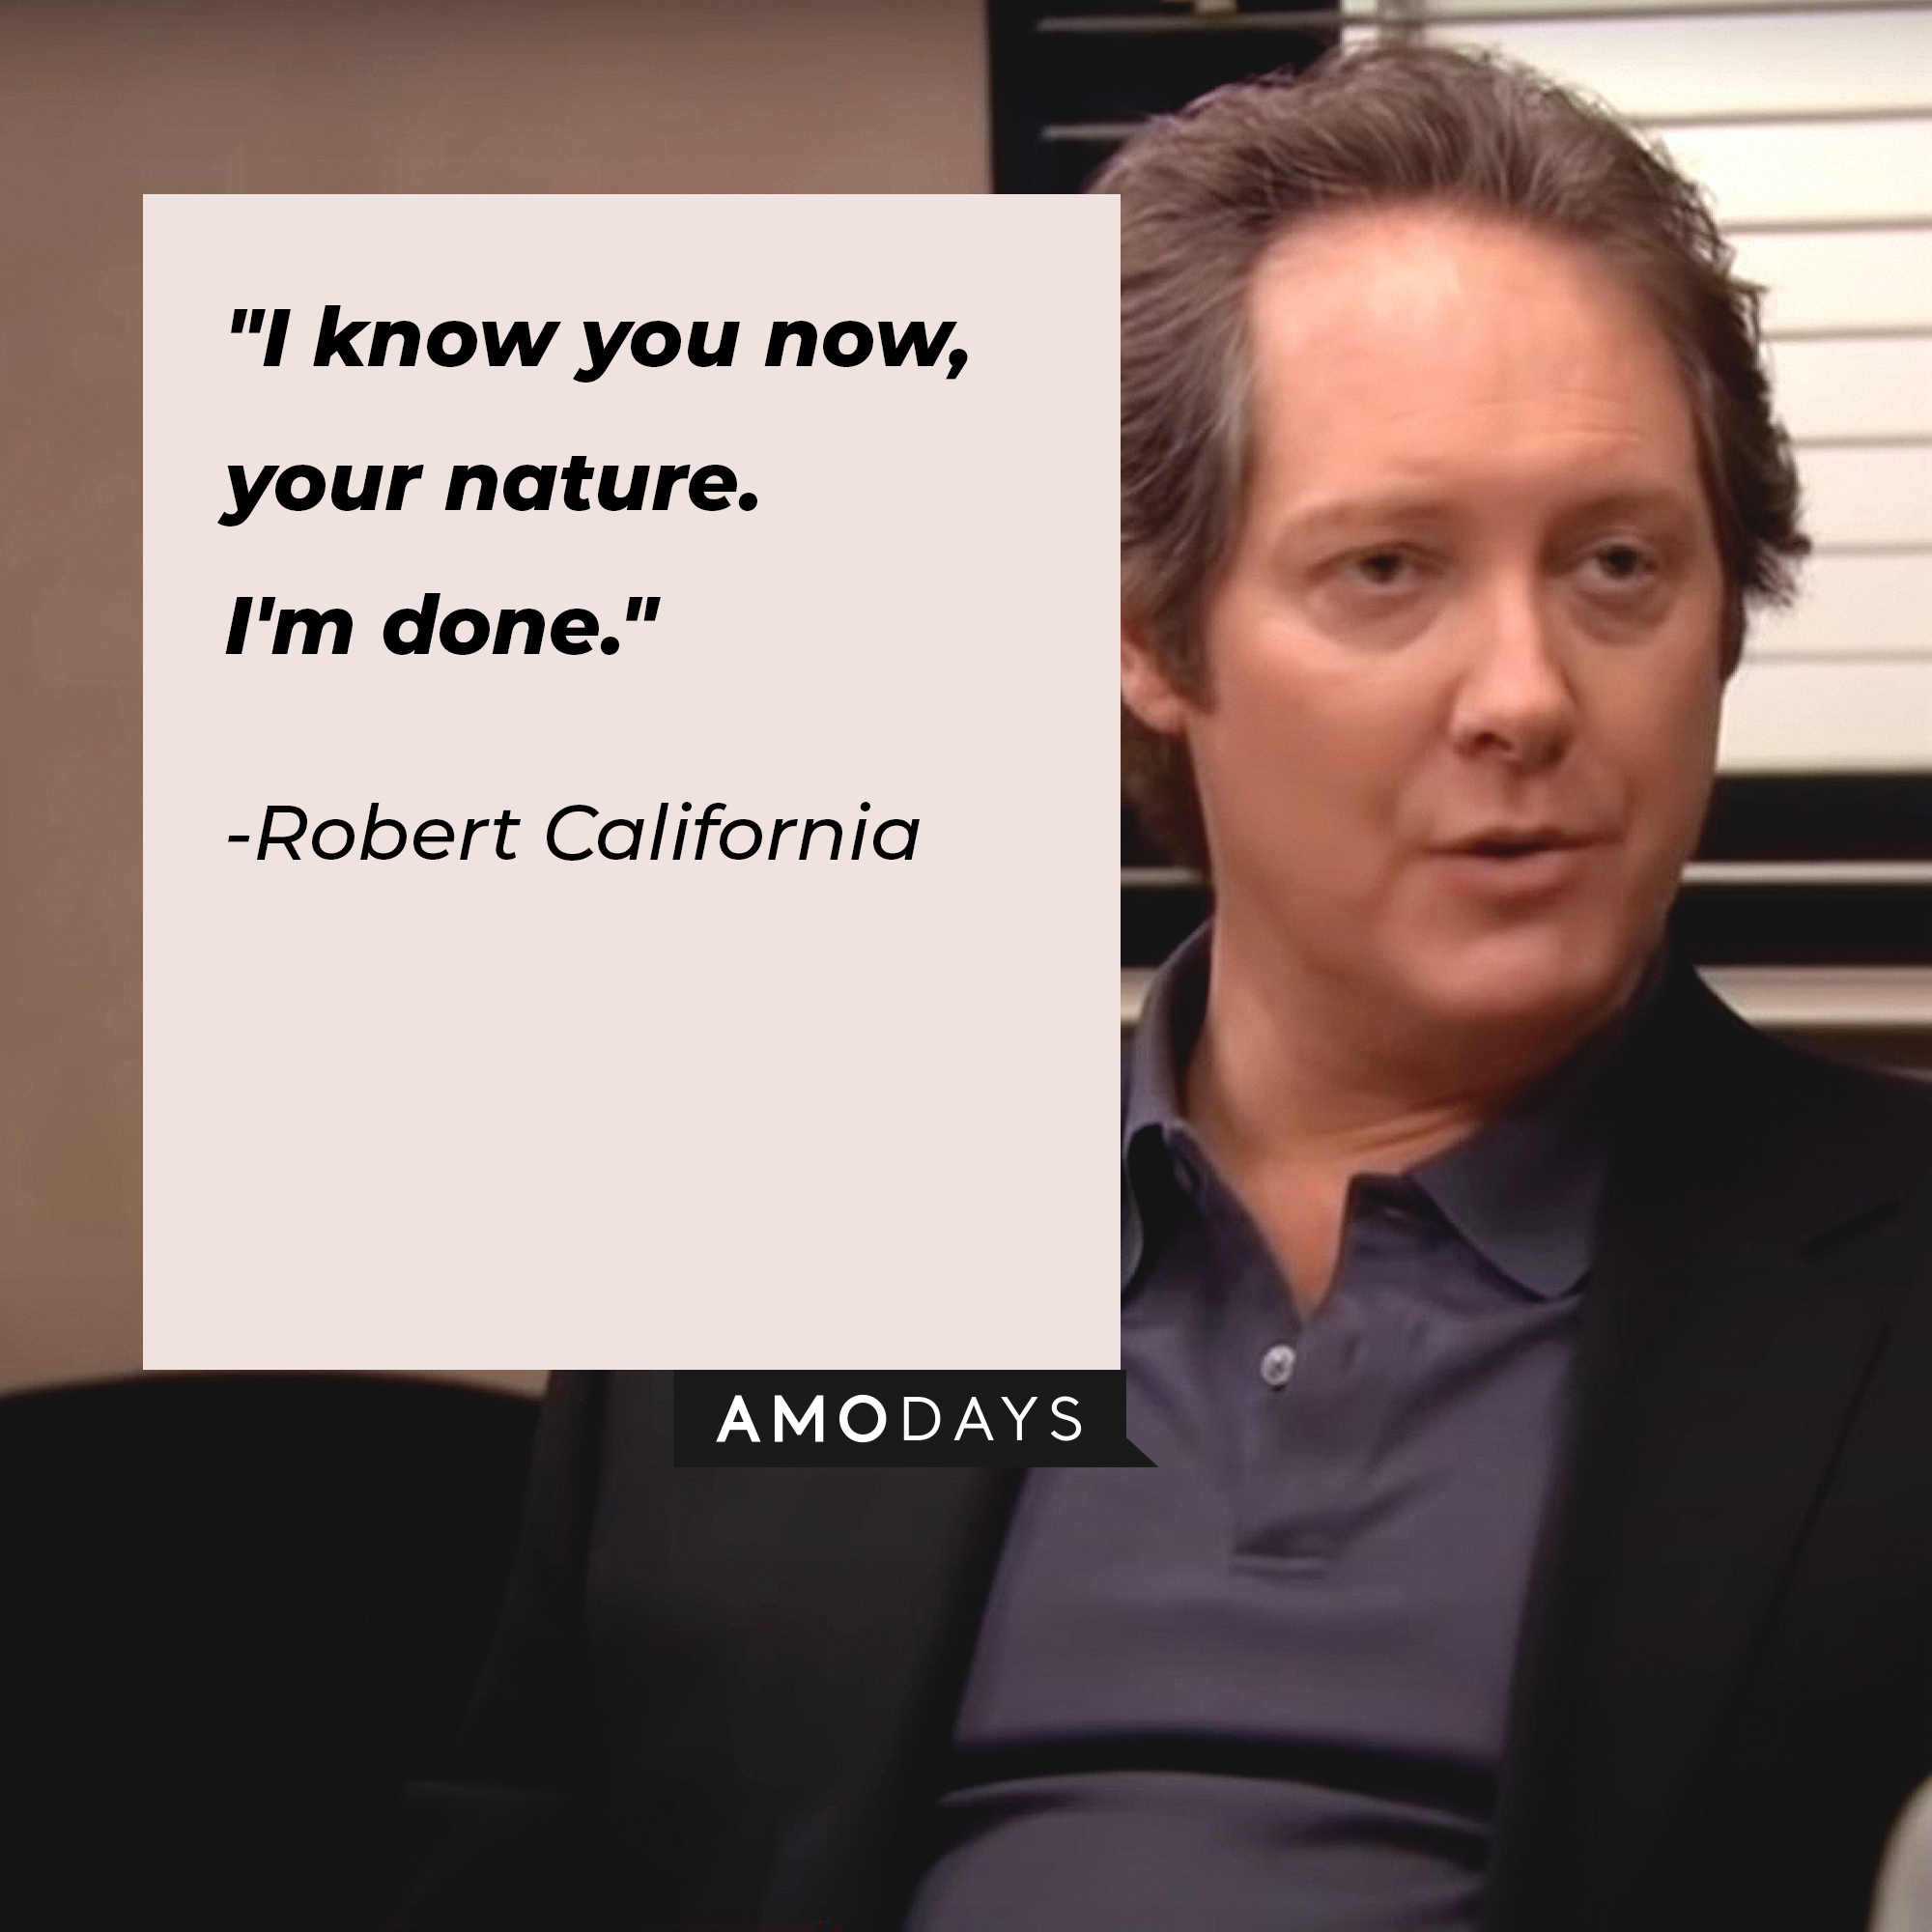 Robert California's quote: "I know you now, your nature. I'm done." | Image: AmoDays